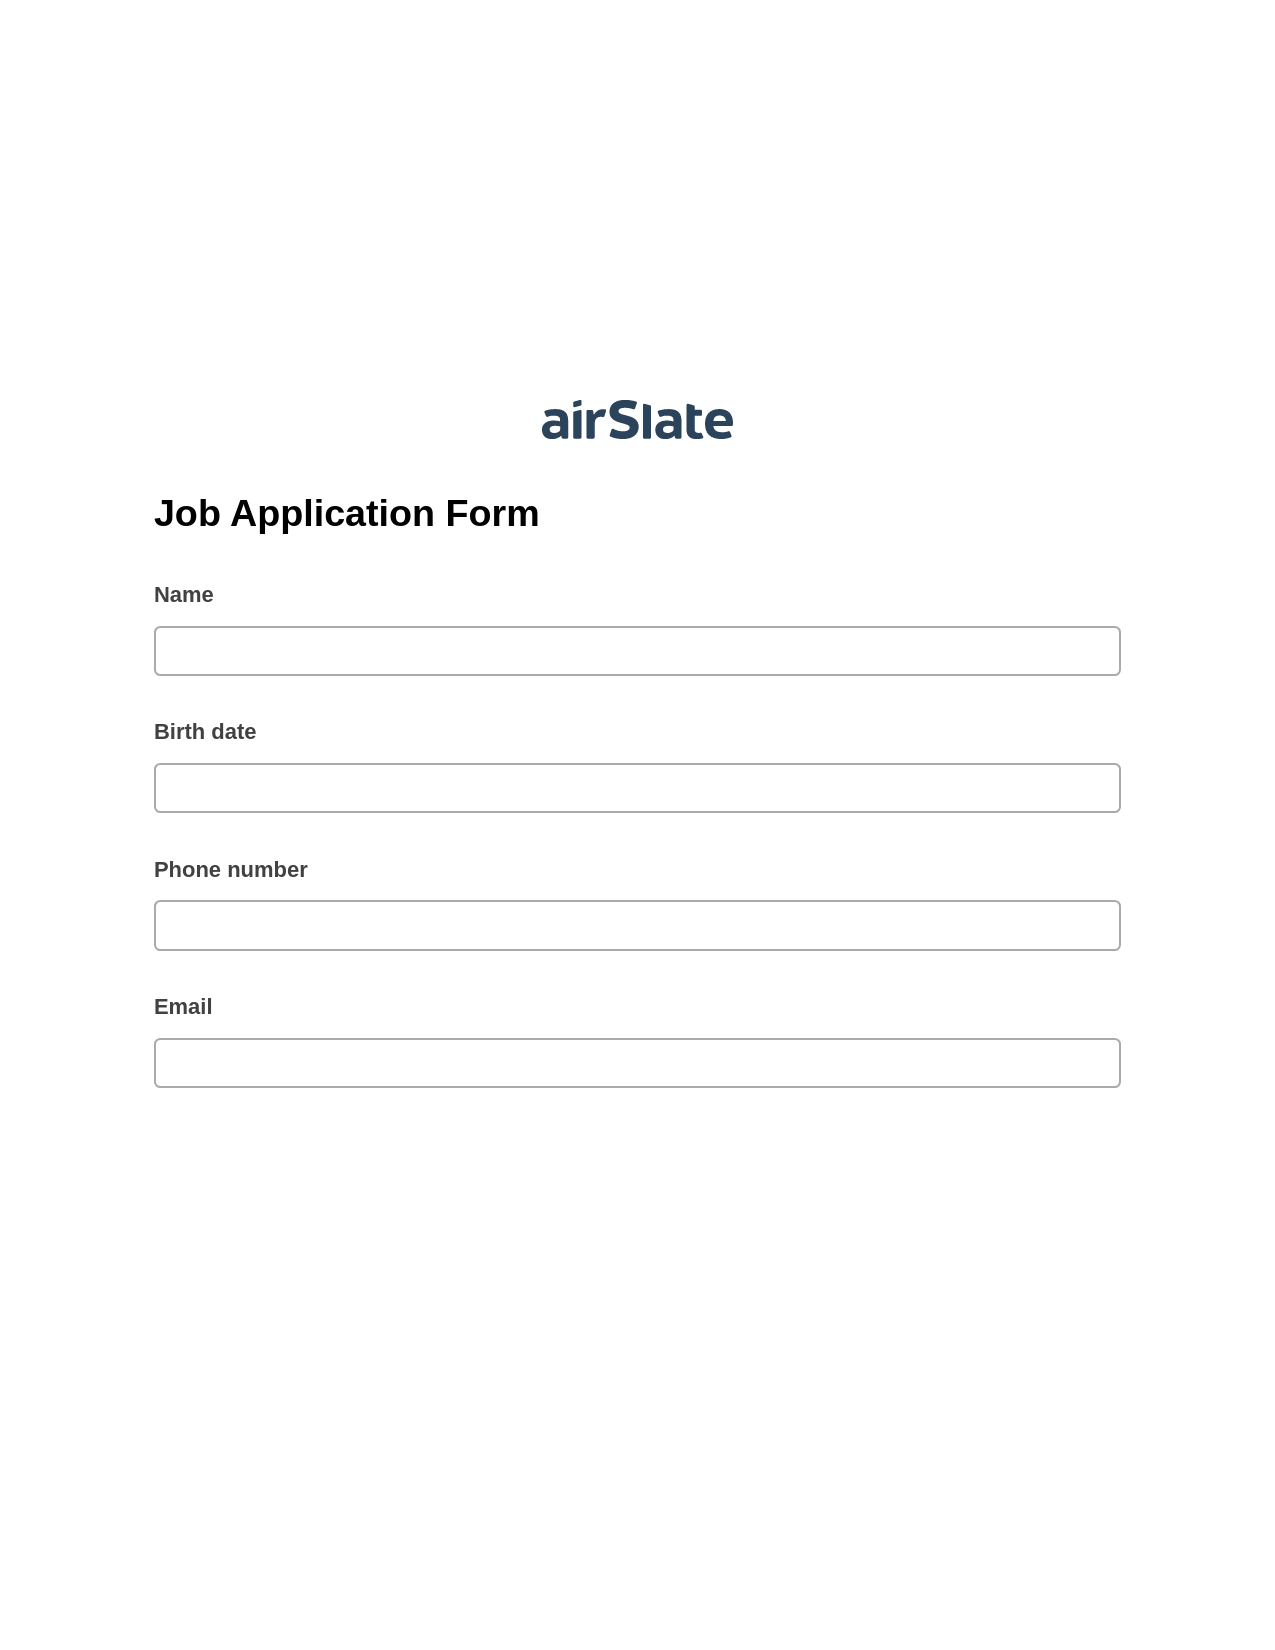 Multirole Job Application Form Pre-fill Slate from MS Dynamics 365 Records Bot, Mailchimp add recipient to audience Bot, Export to MySQL Bot